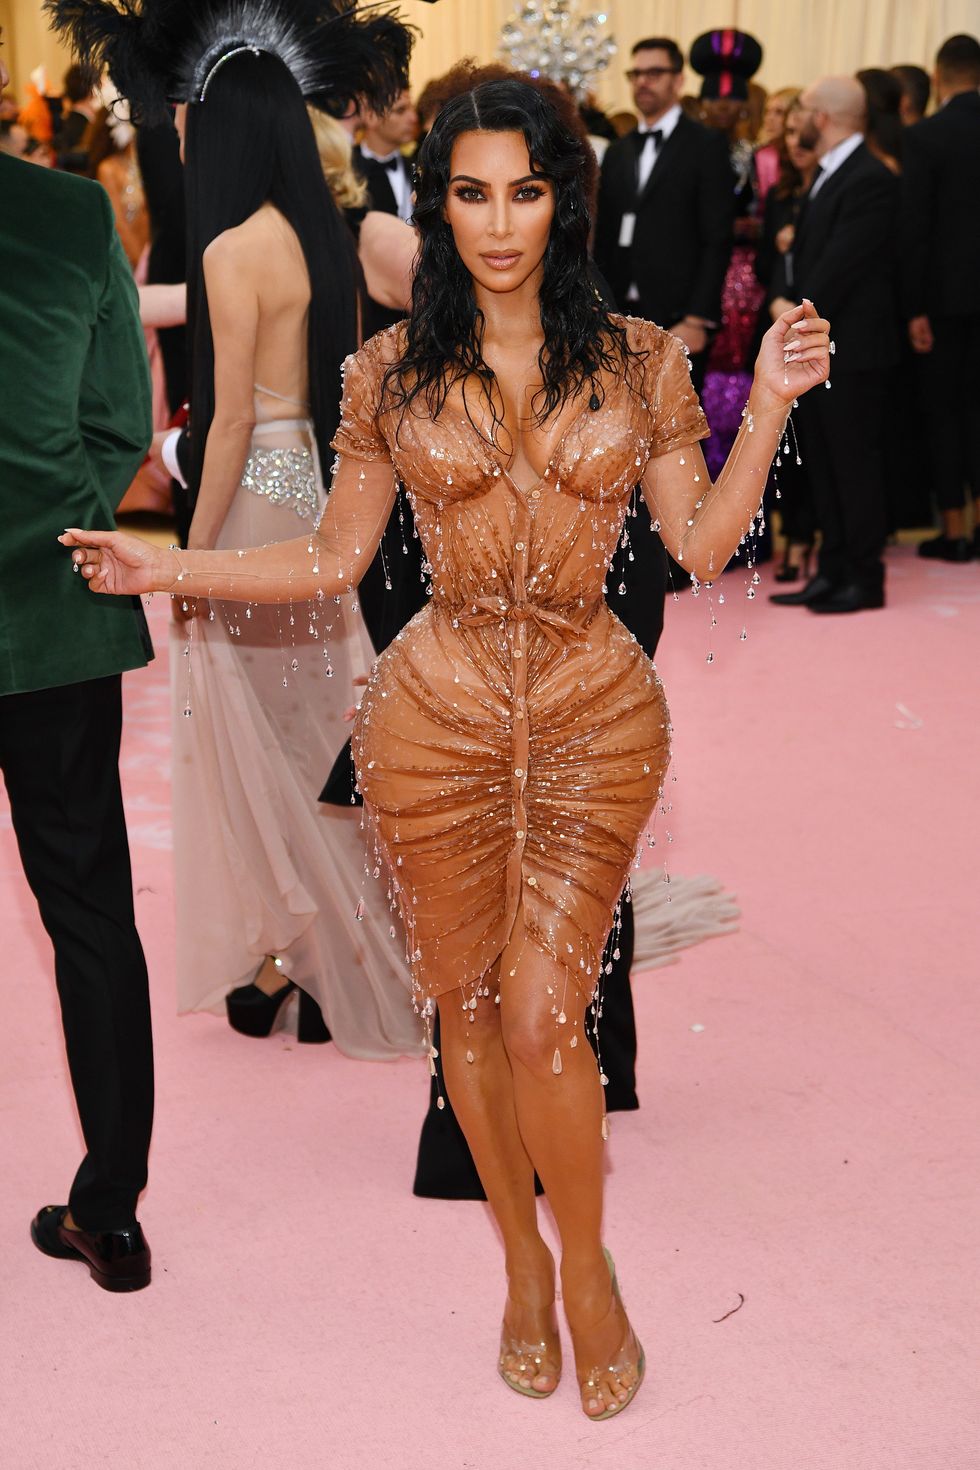 new york, new york   may 06 kim kardashian west attends the 2019 met gala celebrating camp notes on fashion at metropolitan museum of art on may 06, 2019 in new york city photo by dimitrios kambourisgetty images for the met museumvogue